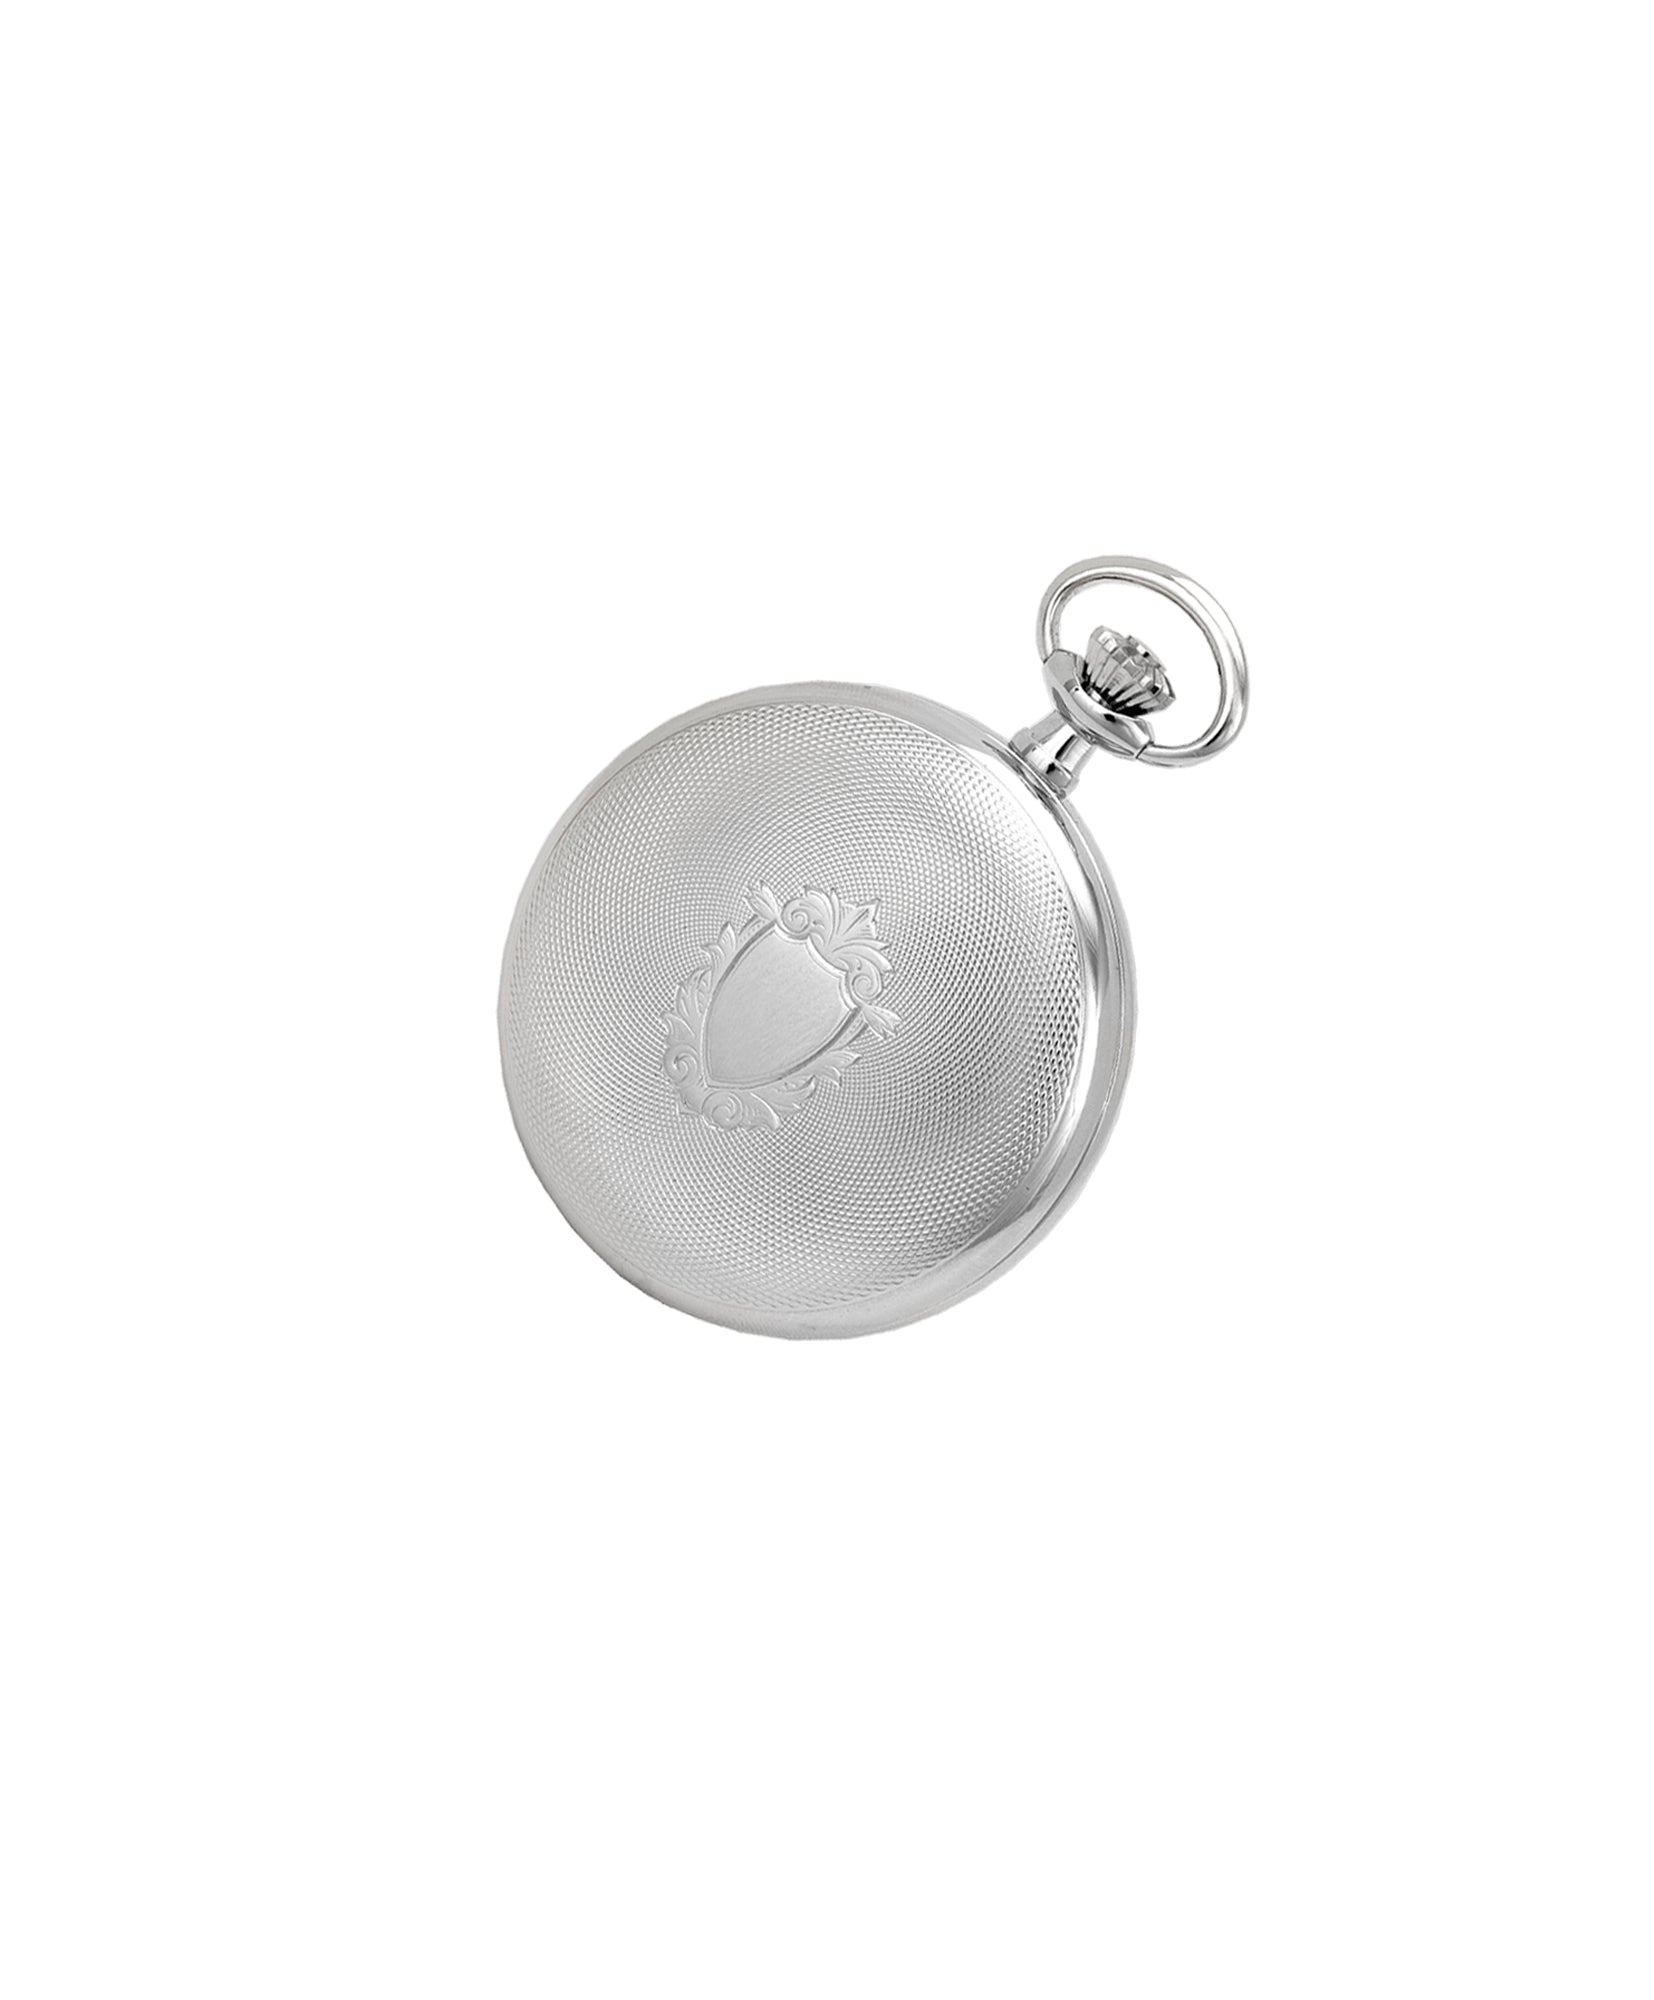 Mechanical Pocket Watch With Silver Full Figure Dial - John Ross Jewellers